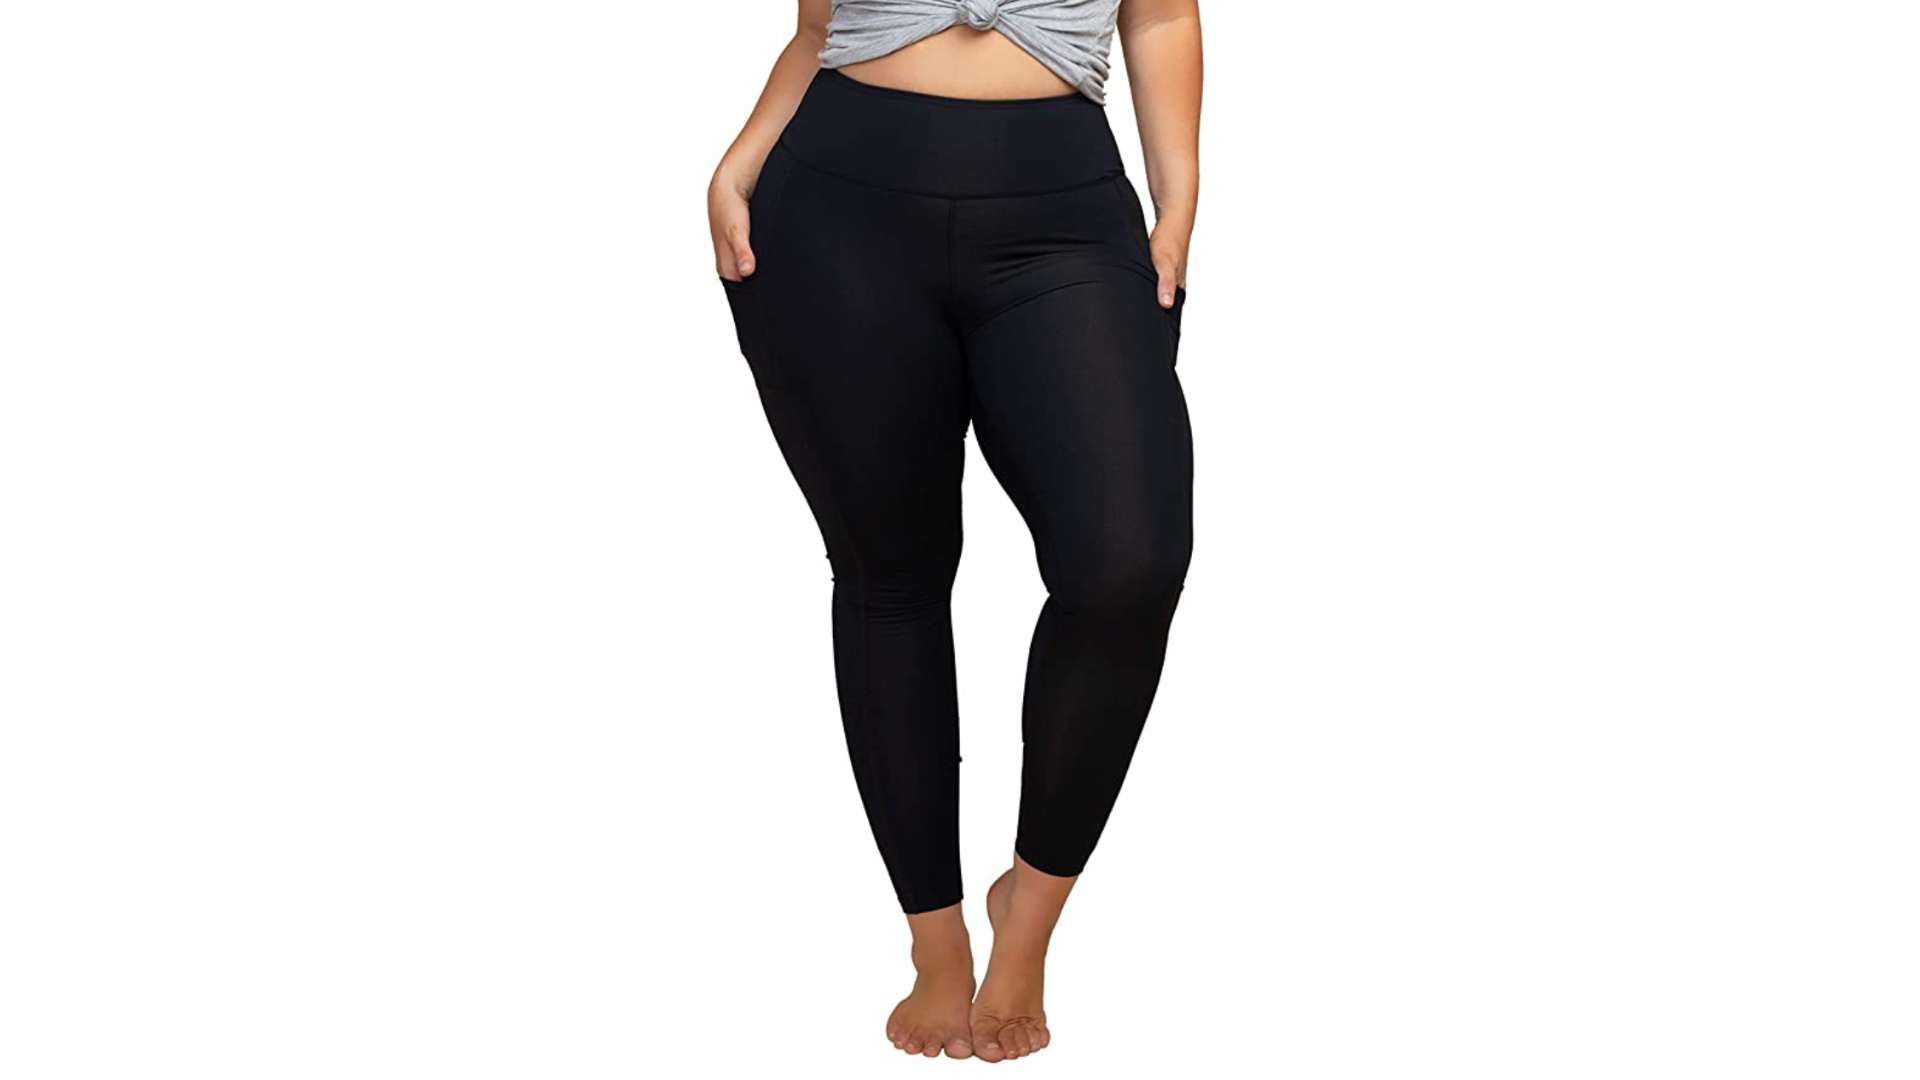 KQUZO best plus size leggings with pockets